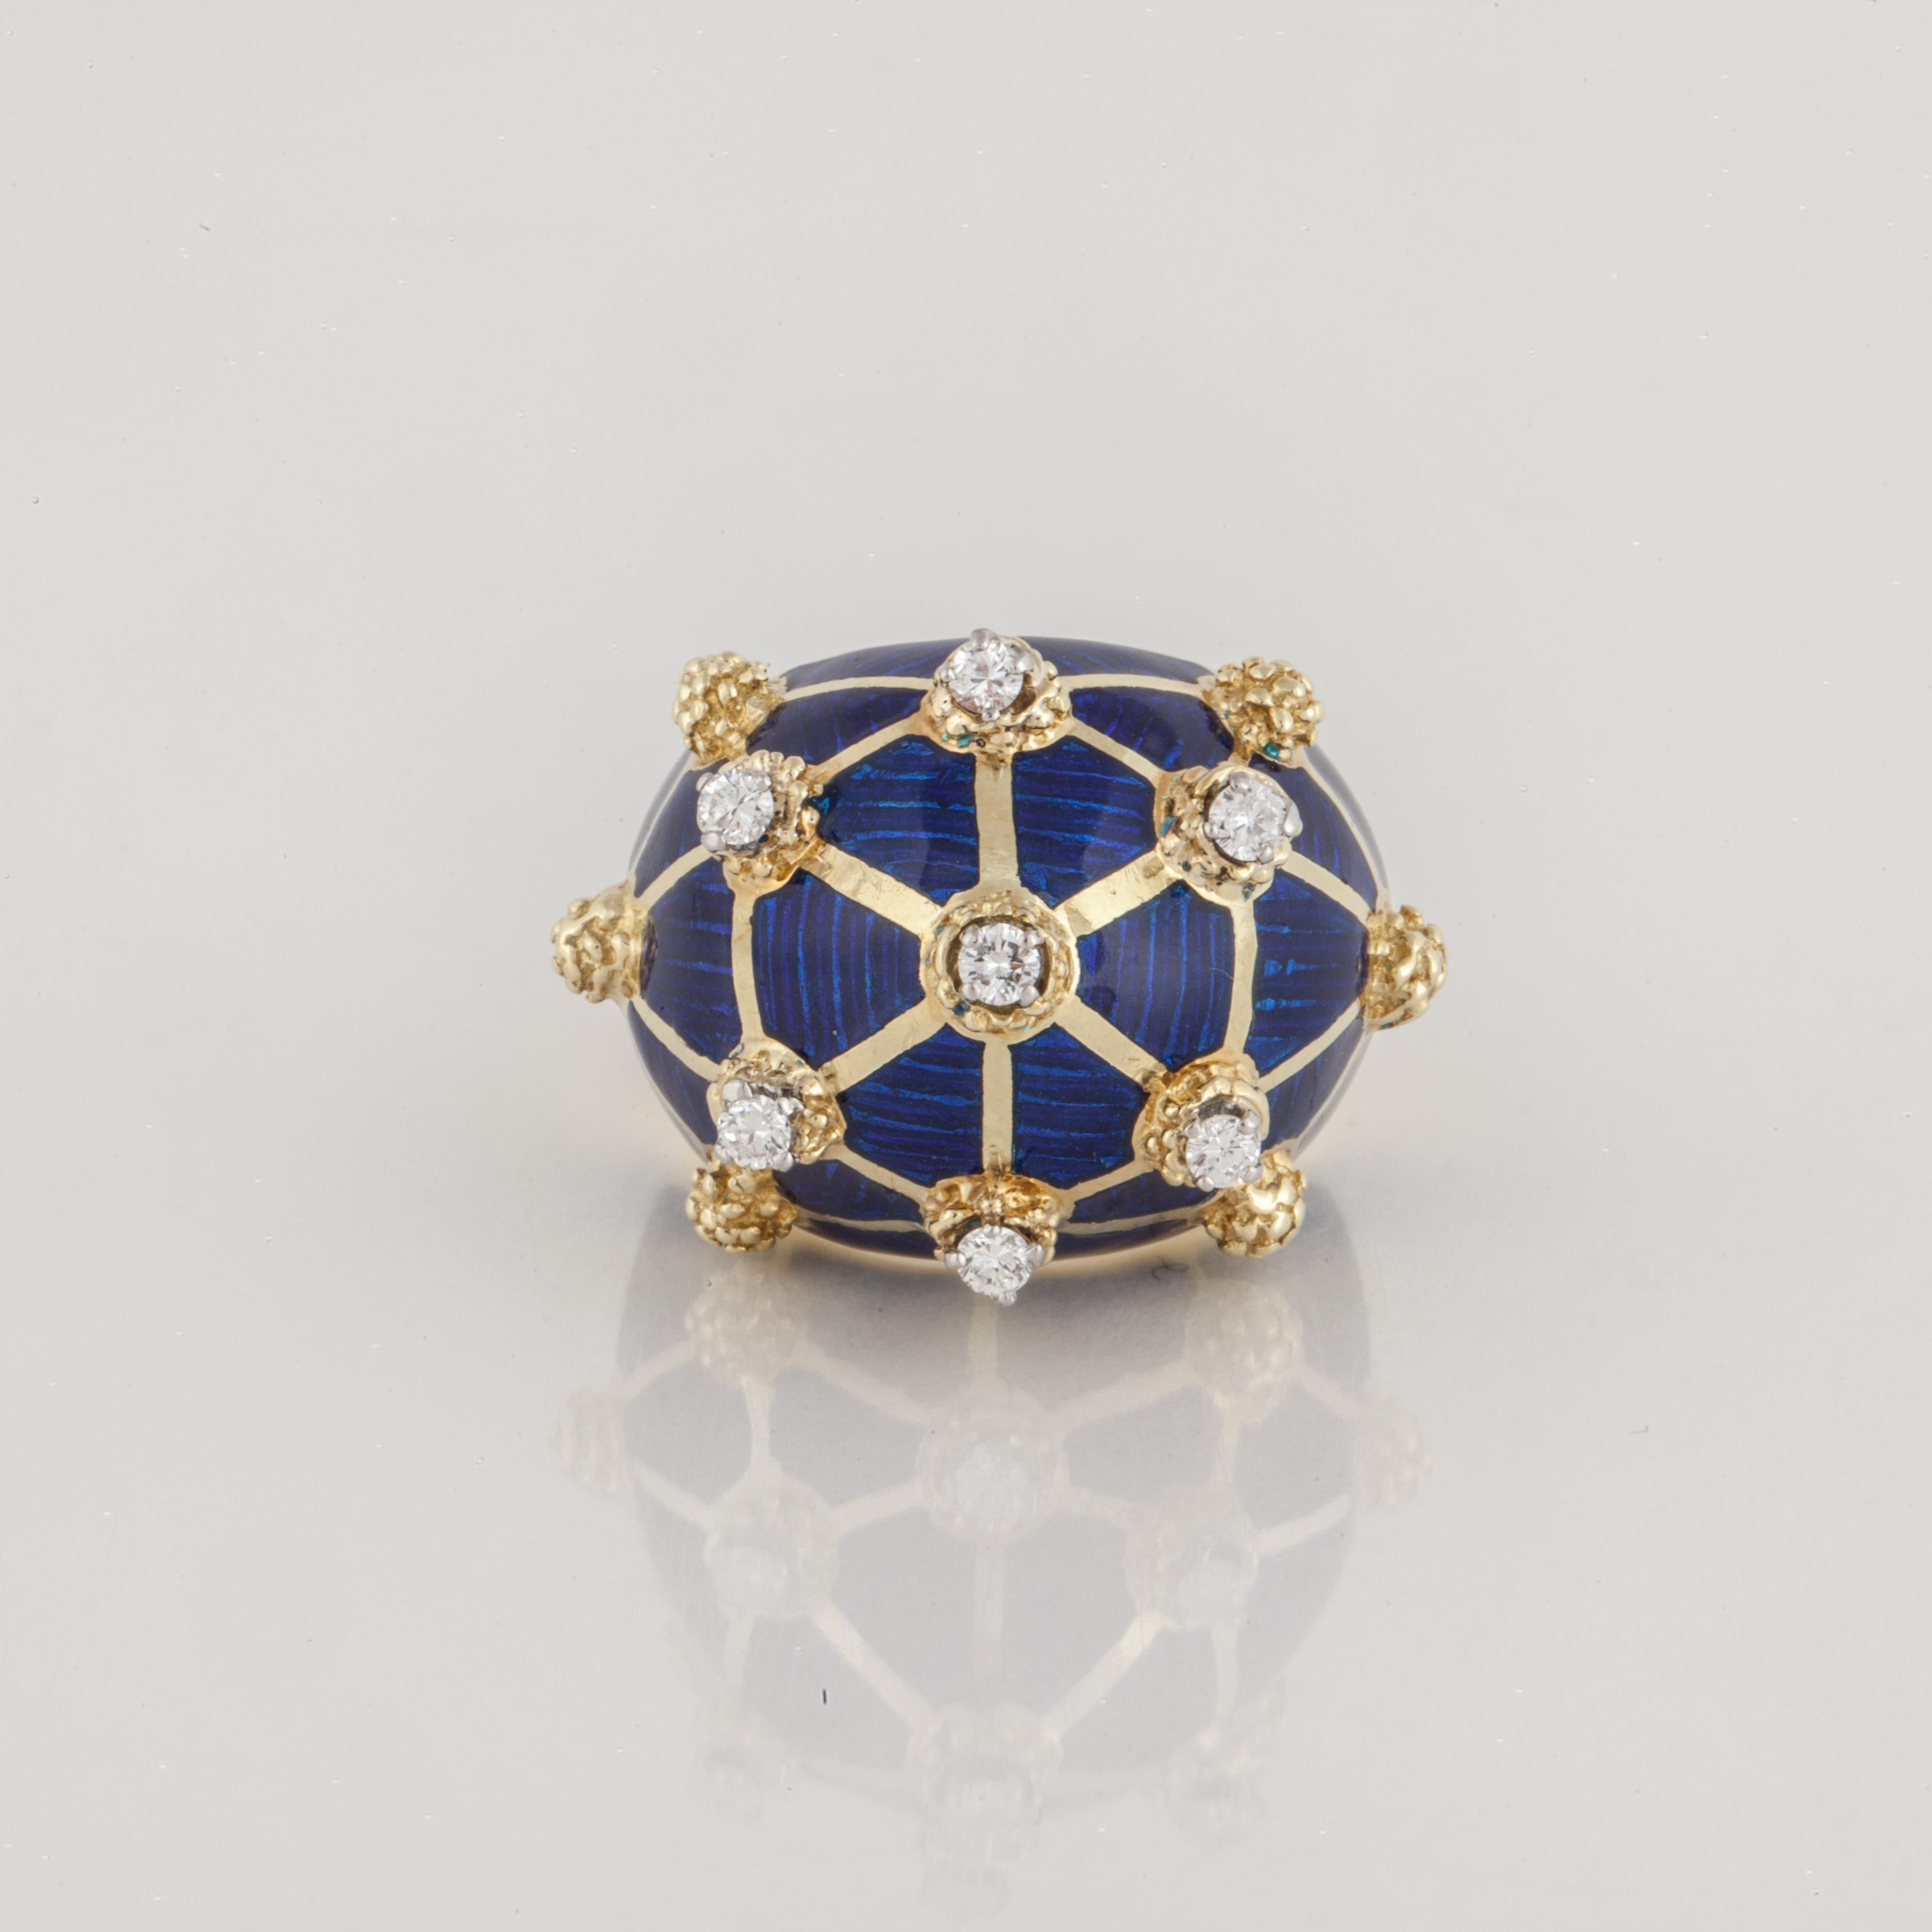 18K yellow gold dome ring with blue enameling and set with diamonds.  There are seven round diamonds totaling 0.45 carats; H-I color and SI clarity.  Presentation area is 1 inch by 3/4 inches and stands 5/8 inches off the finger.  Size 5 1/2.